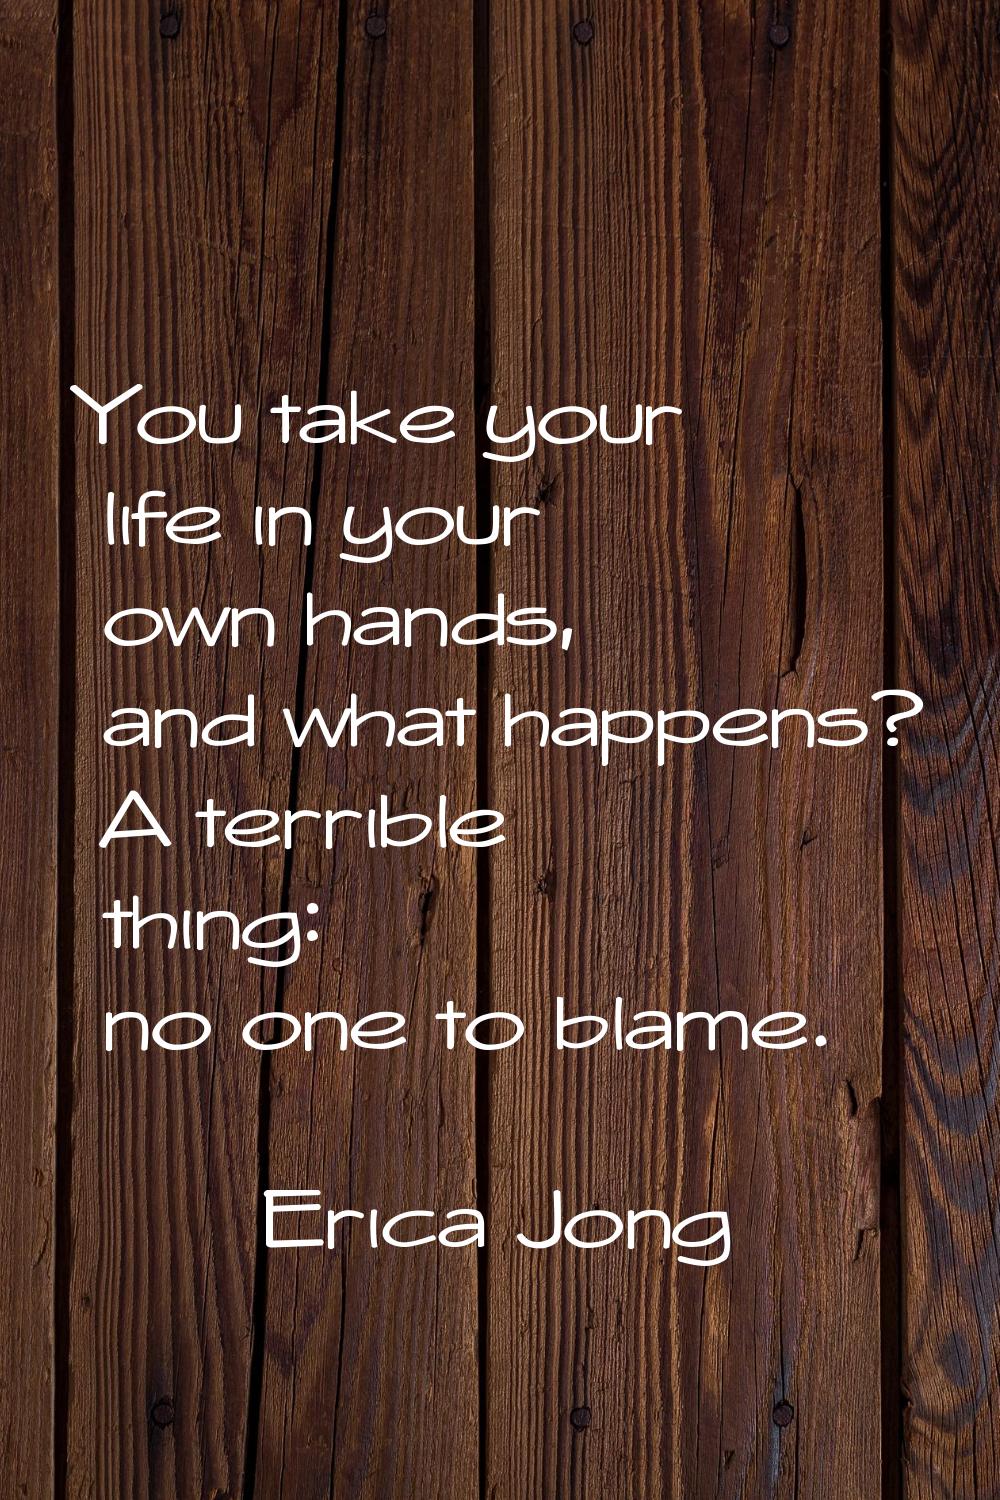 You take your life in your own hands, and what happens? A terrible thing: no one to blame.